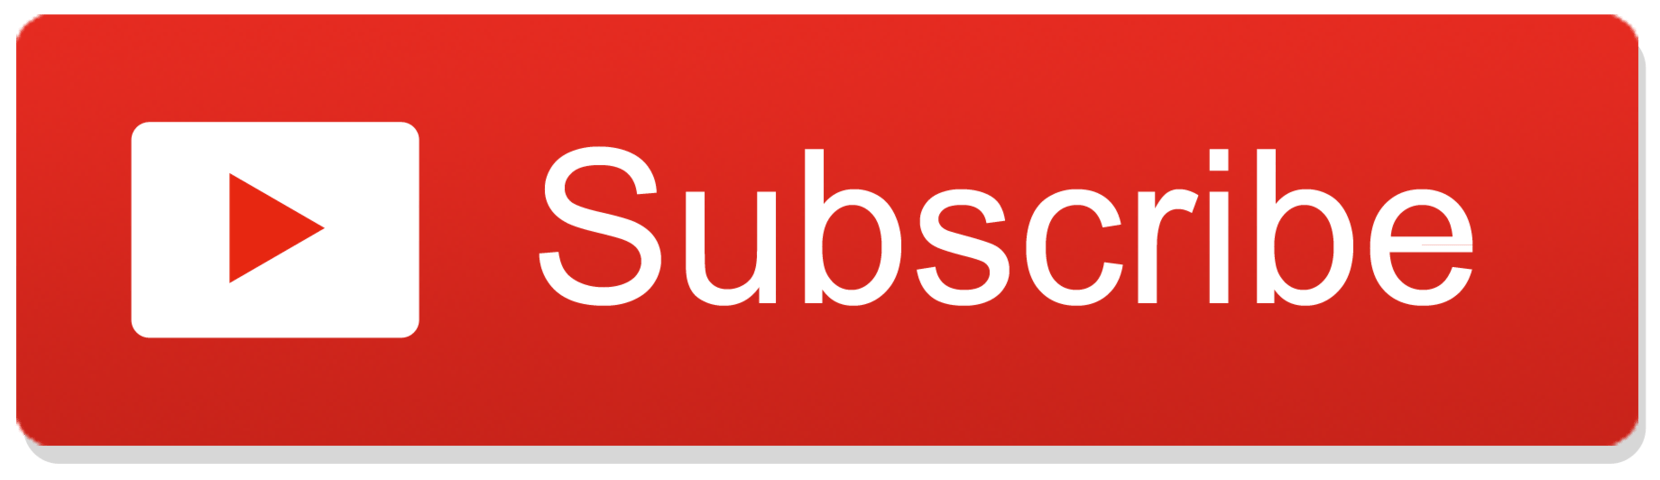 Subscribe Youtube Button Png Hd Transparent Background Image Lifepng